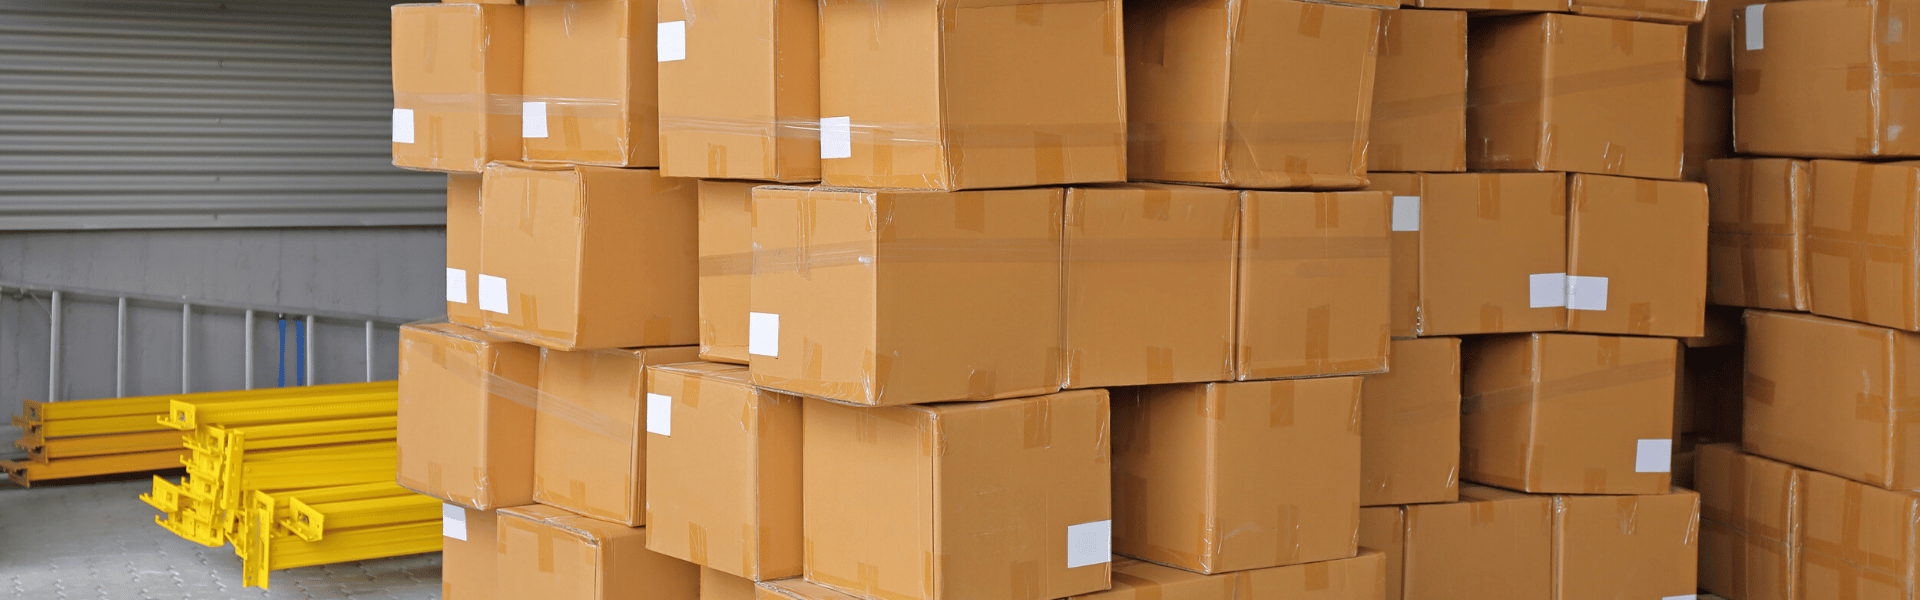 The Difference Between Web Orders and E-Procurement Orders